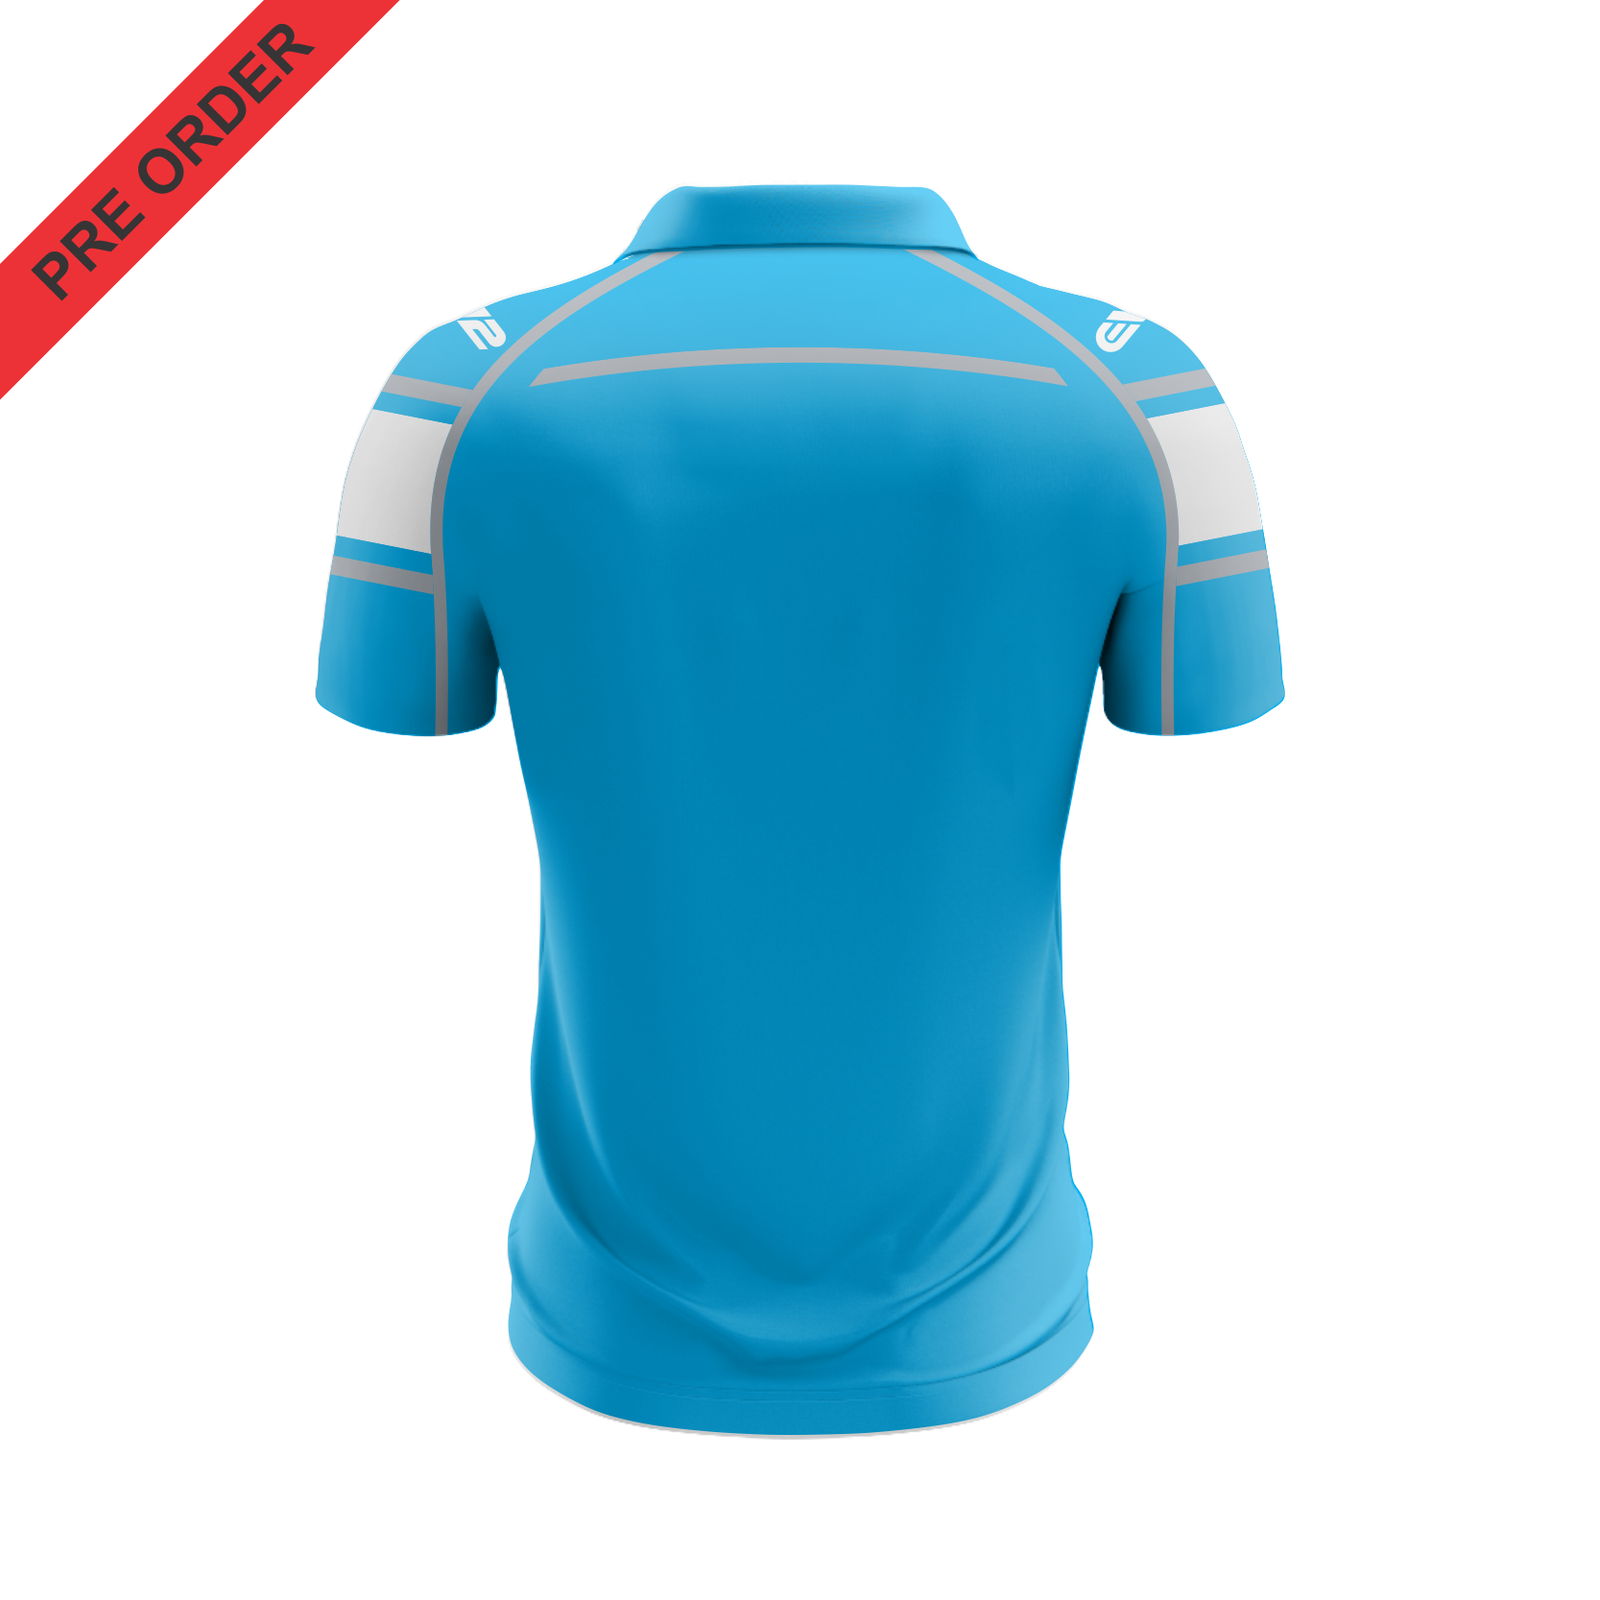 Wests Rugby League - Club Polo